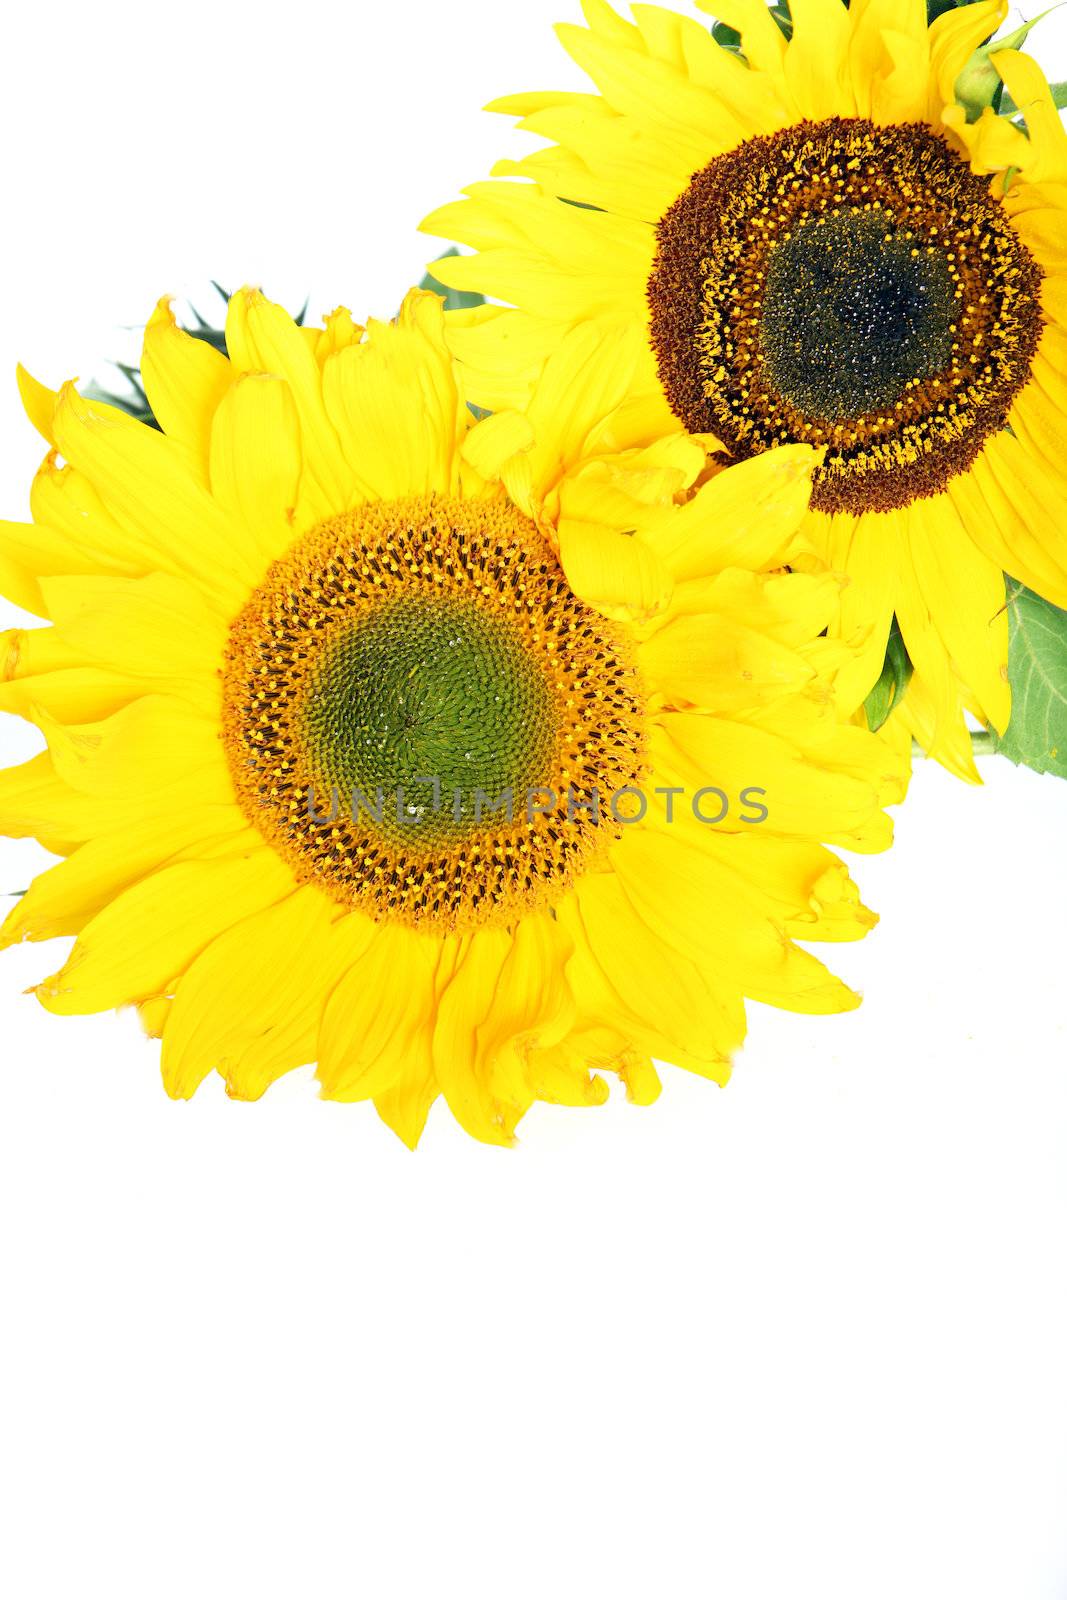 Twp bright colourful yellow sunflowers showing the spiral pattern of the florets on th disc isolated on white with copyspace 